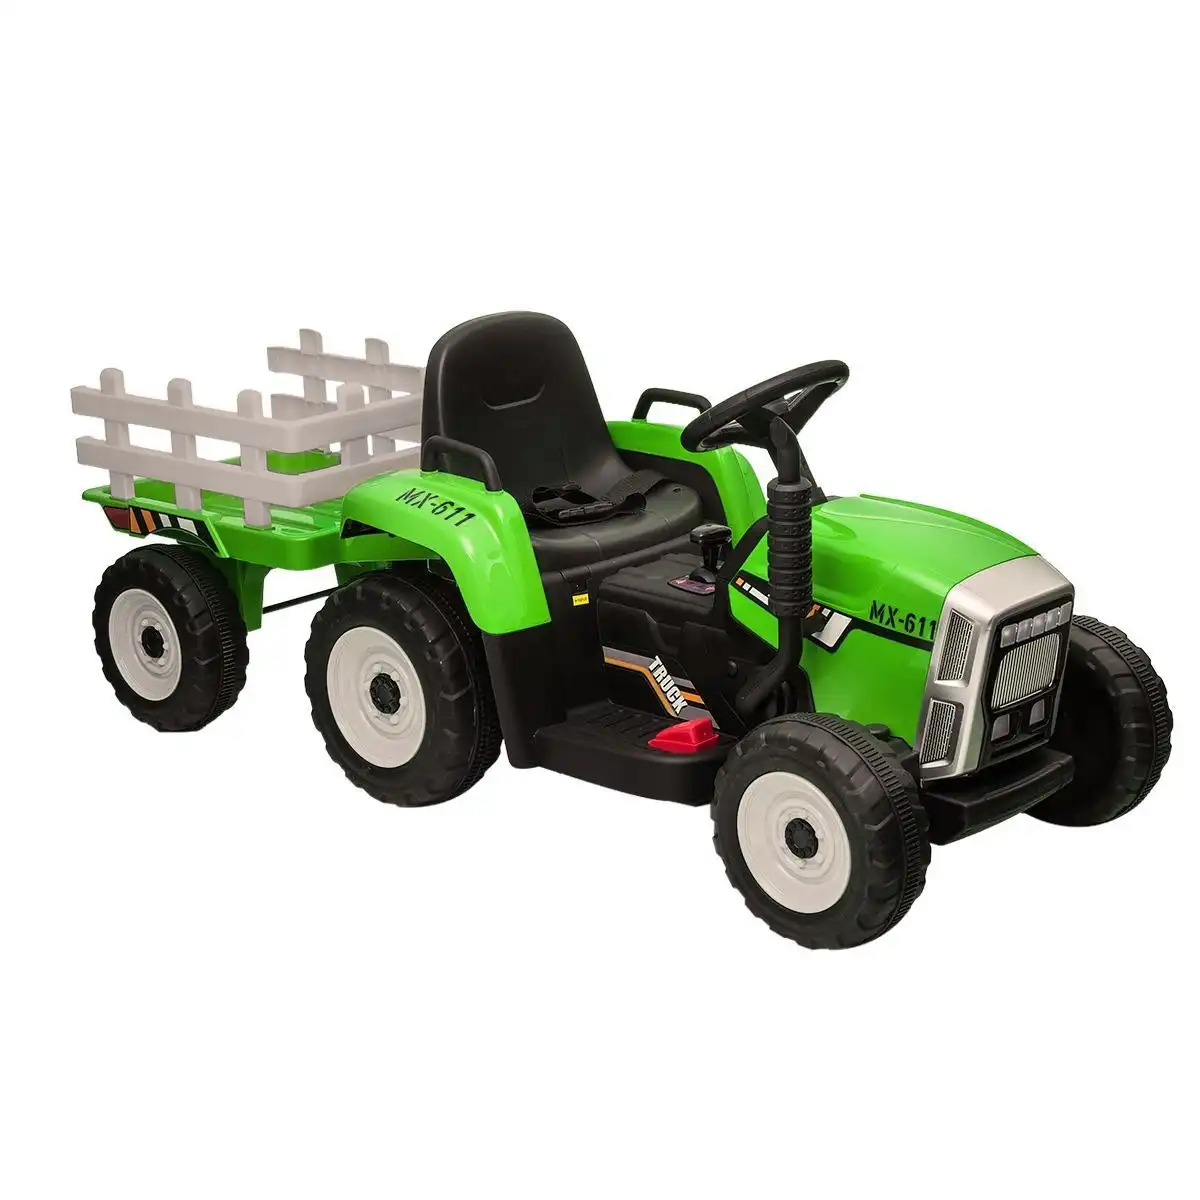 Ausway Kids Farm Tractor Electric Ride On Toys 2.4G R/C Remote Control Cars w/ Trailer Green